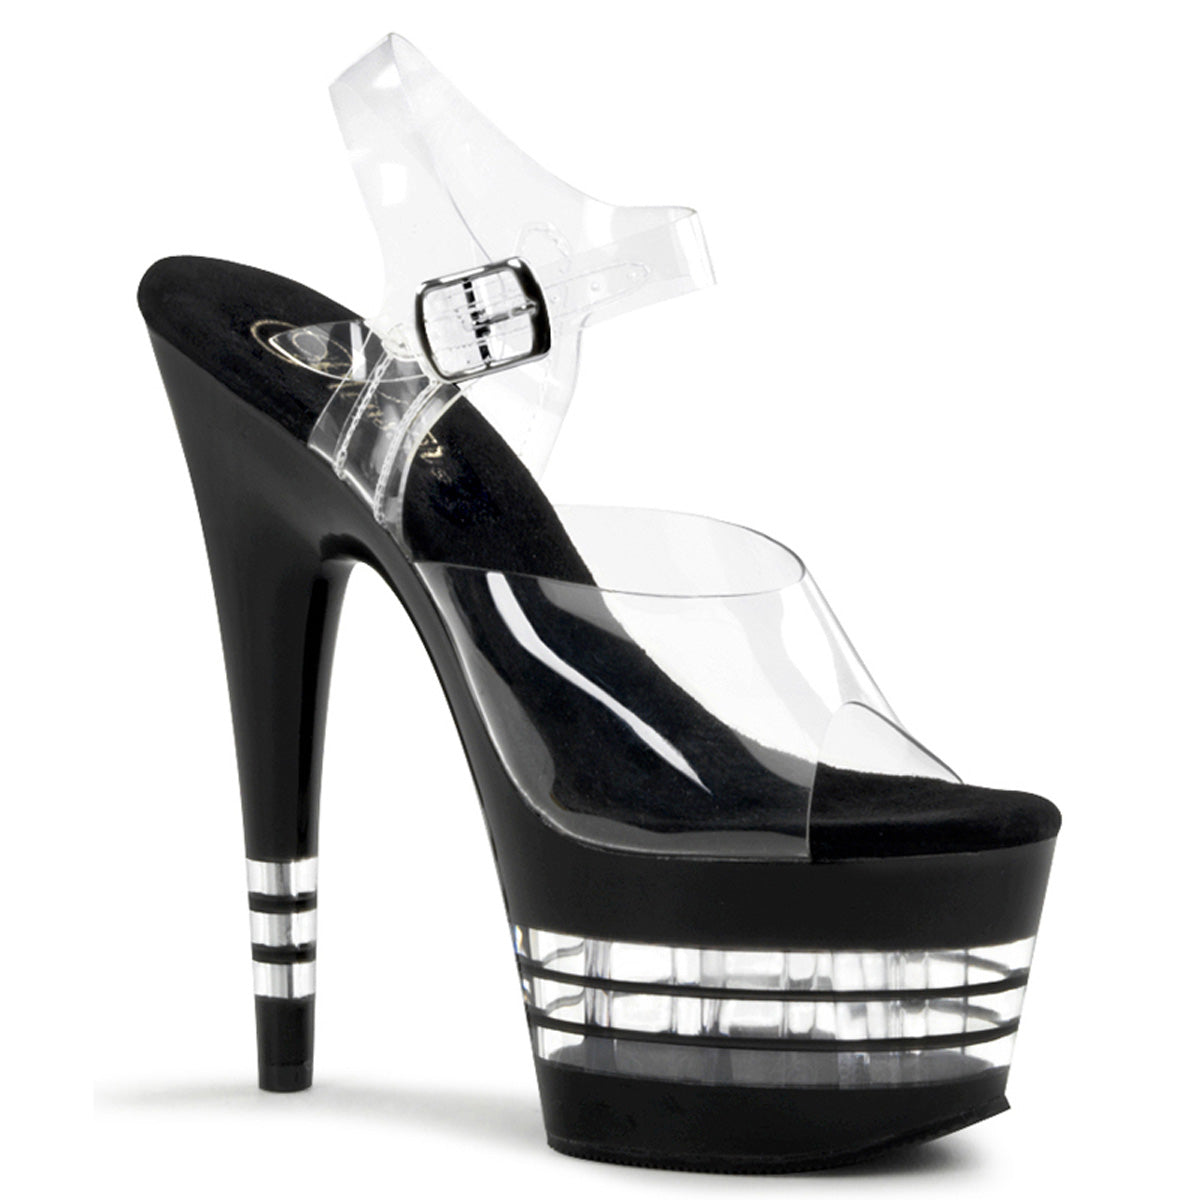 ADORE-708LN/C/B 7" PLEASER FAST DELIVERY 24-48h